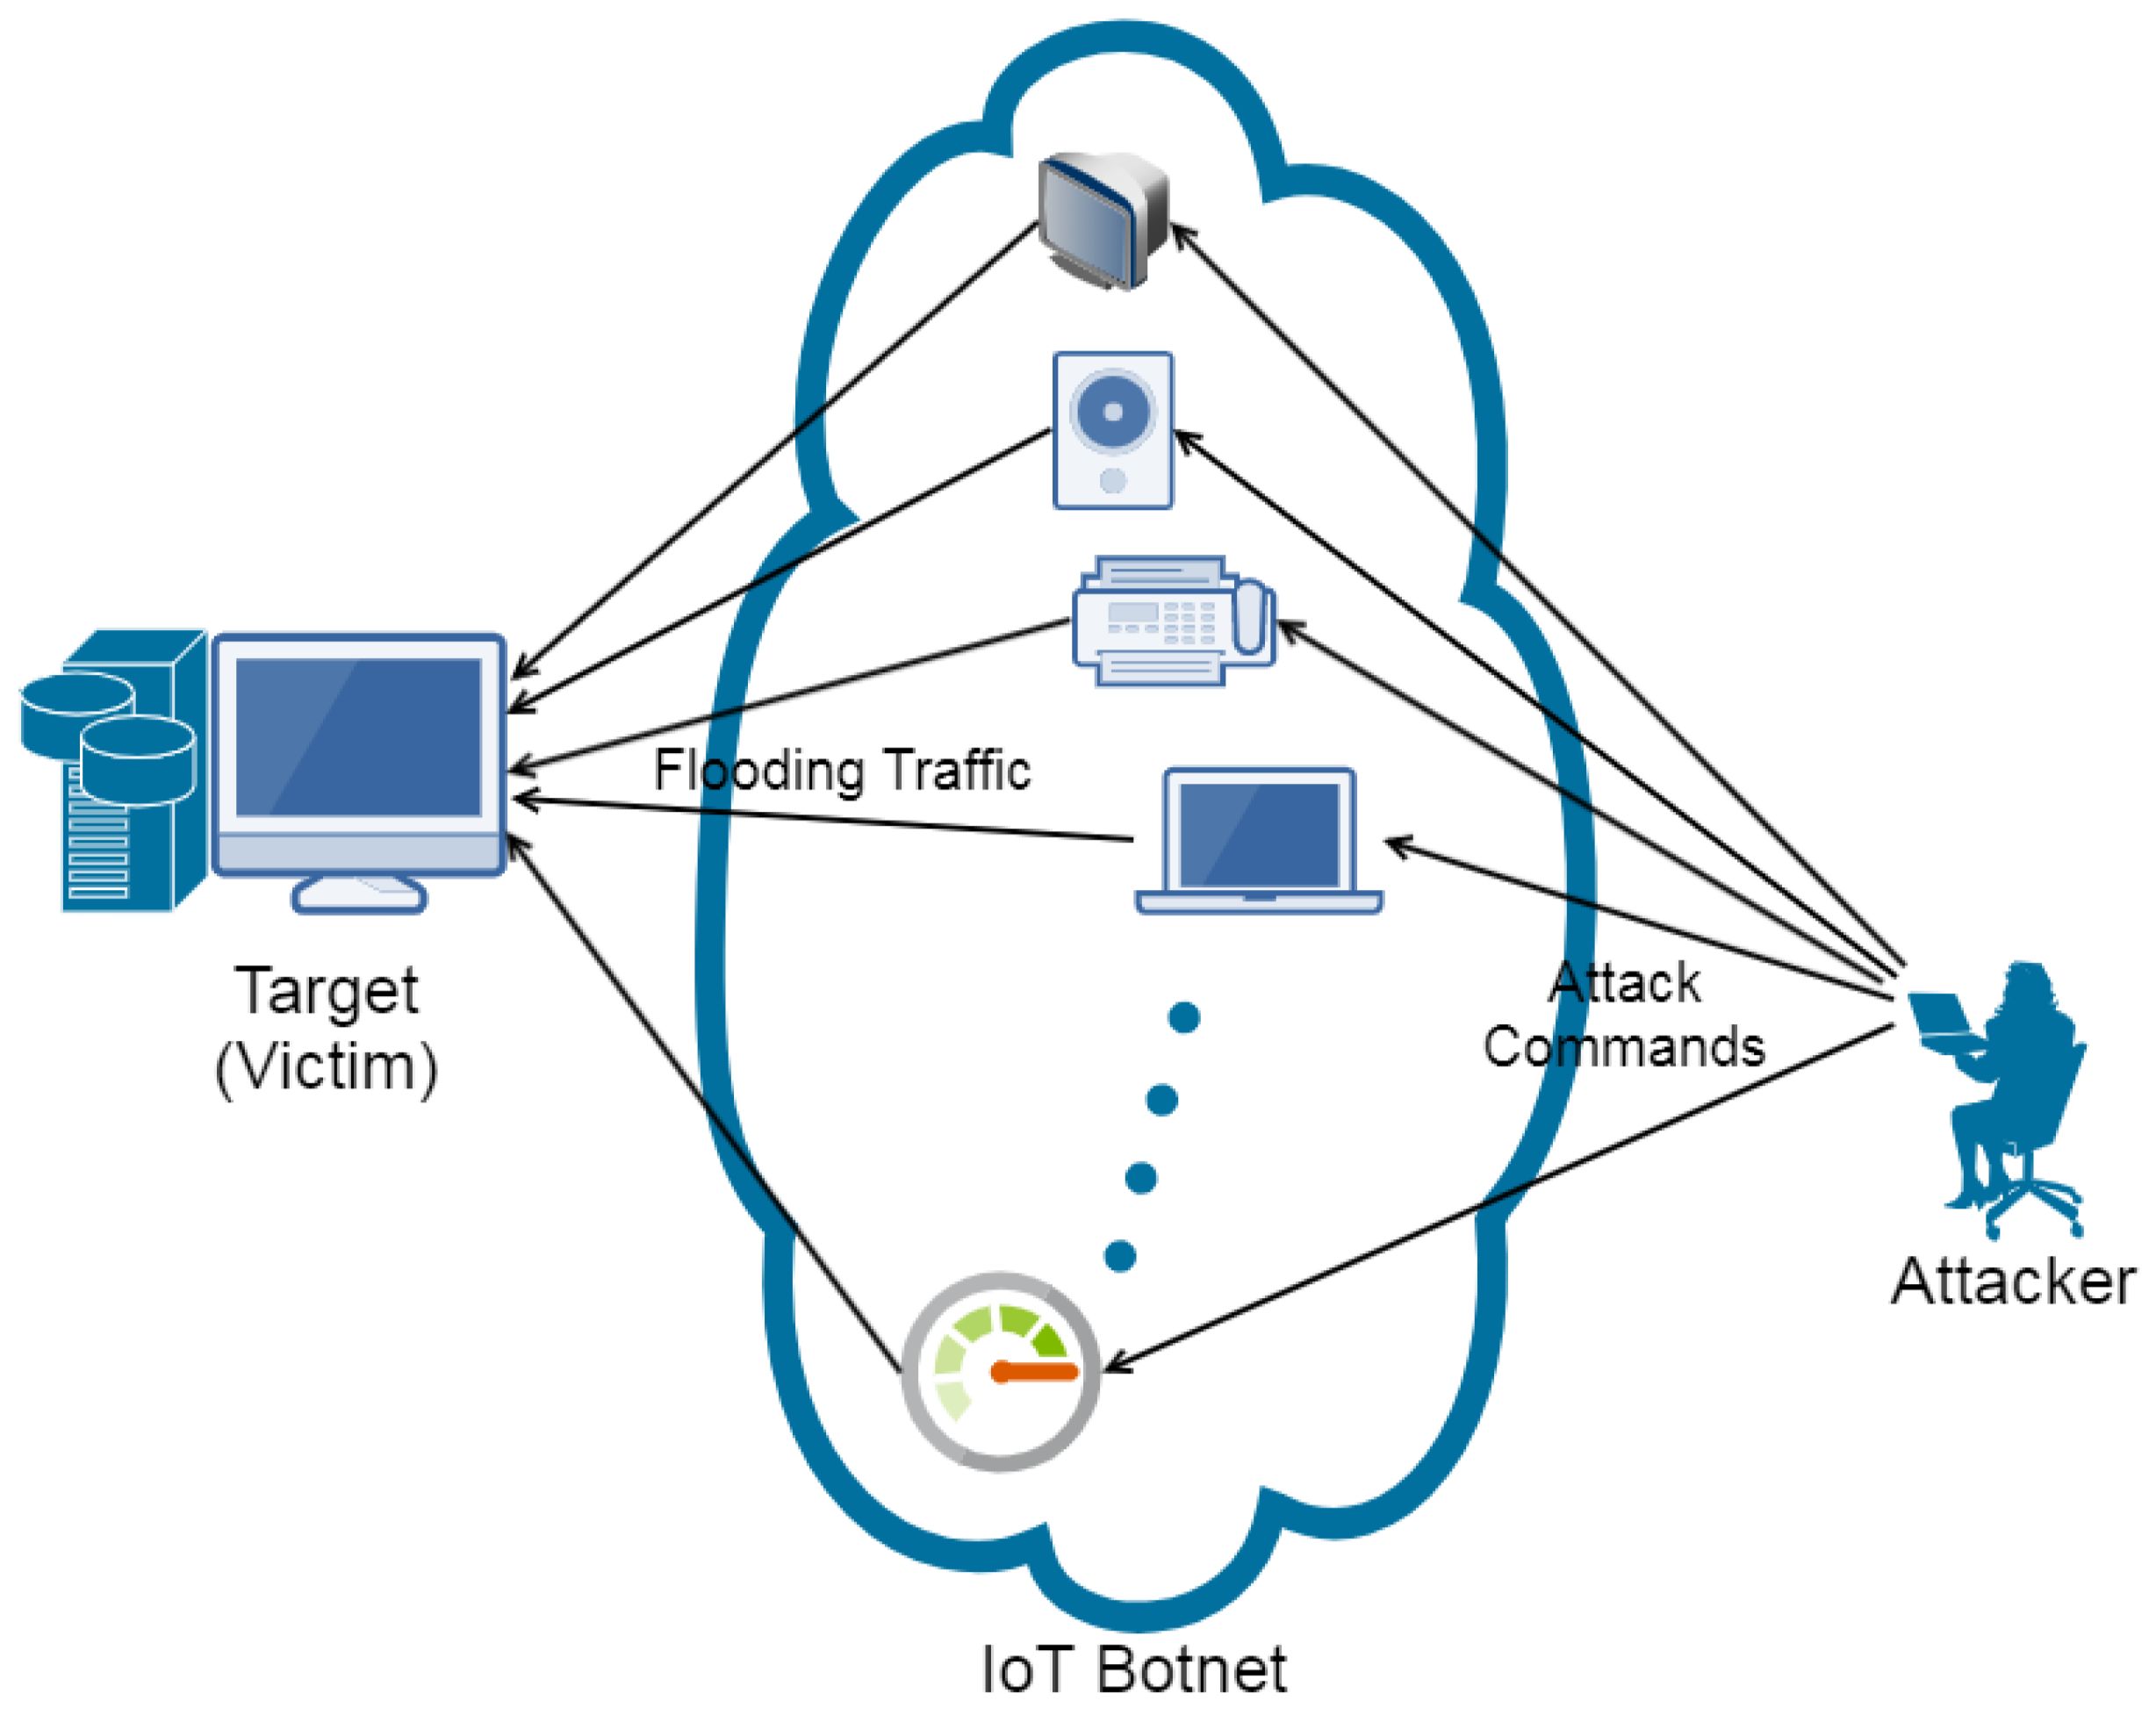 How Is Ddos Related To The Internet Of Things (IoT)?